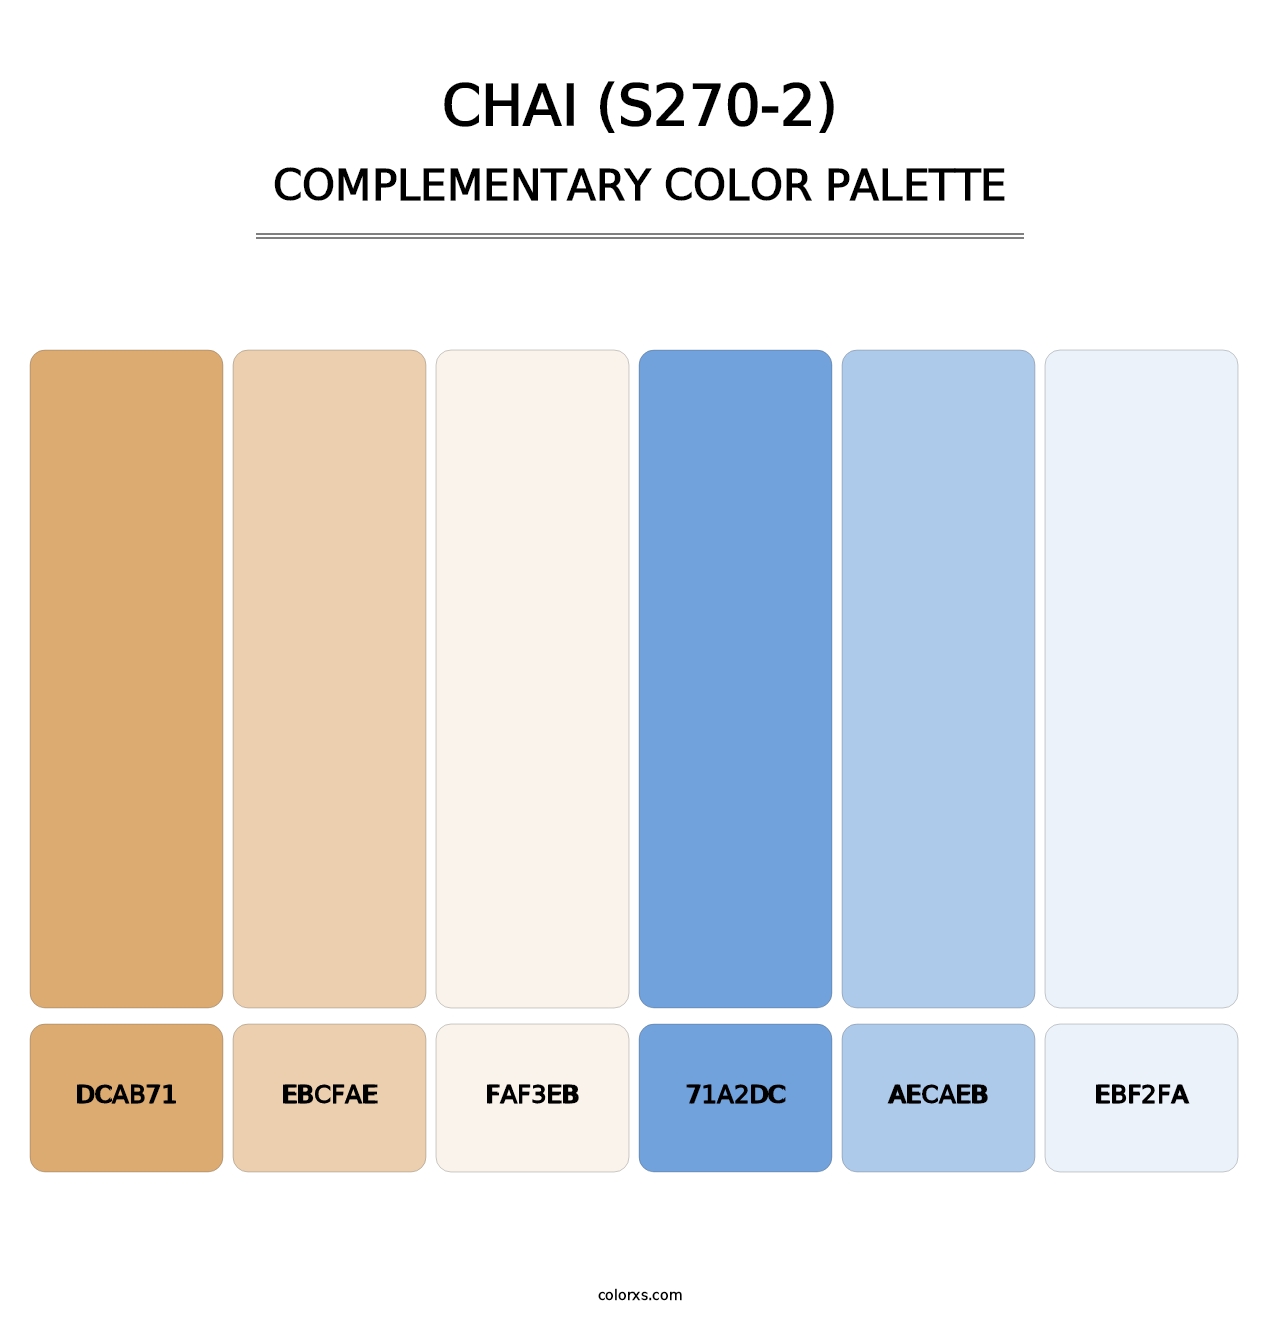 Chai (S270-2) - Complementary Color Palette